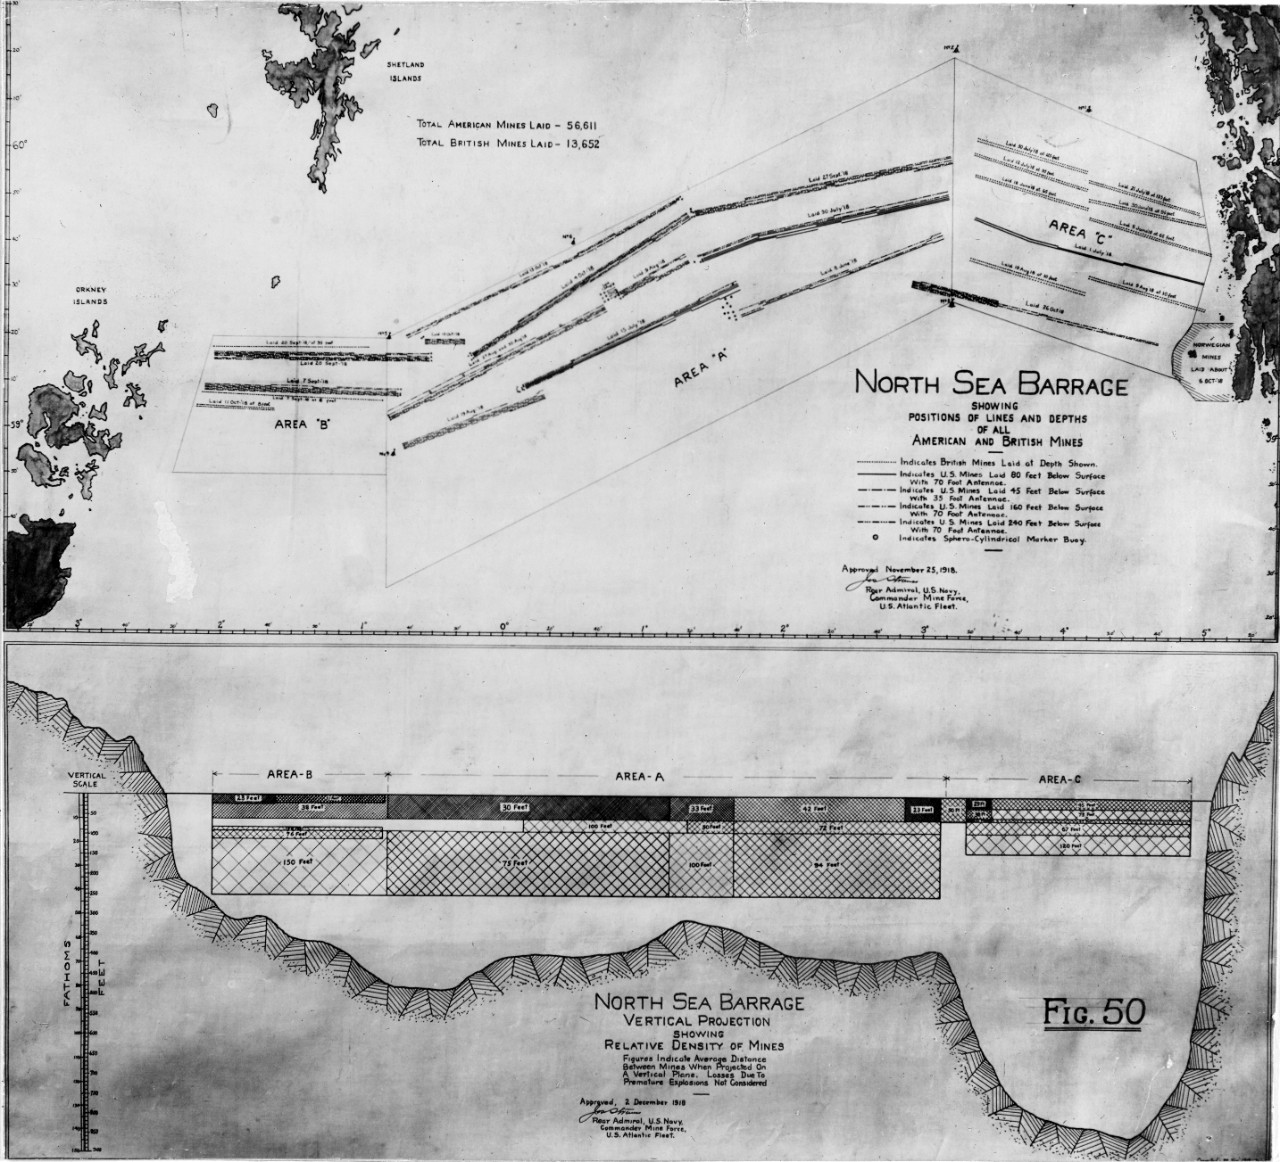 North Sea Mine Barrage, 1918. These vertical and horizontal charts show the locations and densities of the minefields. These were issued in November and December 1918, after the fields were completed. Note that the charts were signed by Rear Adm. Joseph Strauss. (Naval History and Heritage Command Photograph NH 2437)